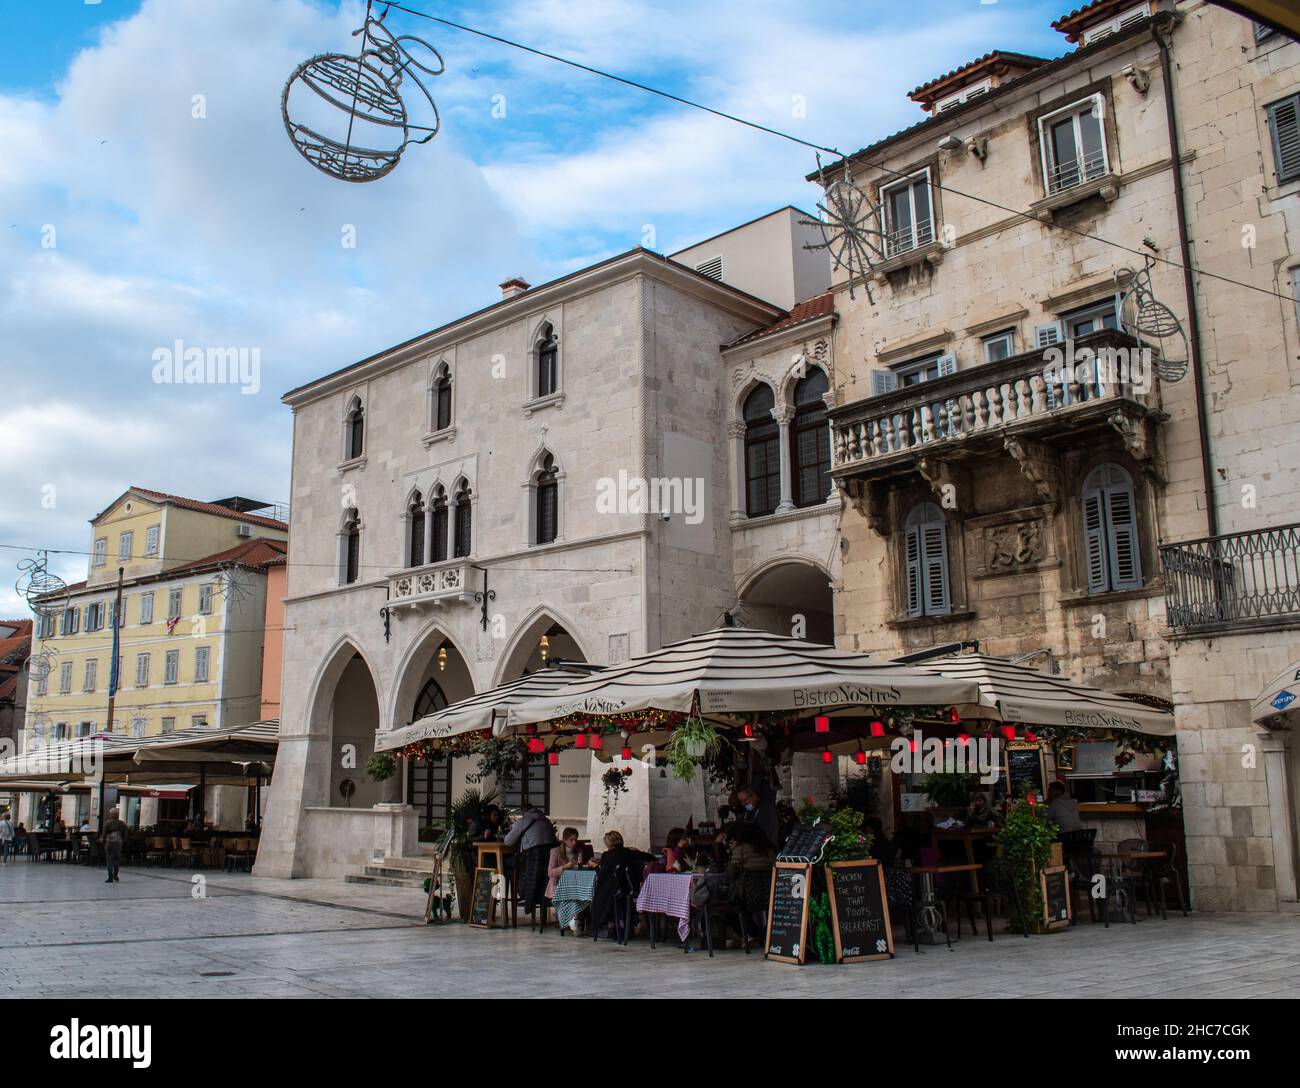 Walkway lined with restaurants and cafes, popular gathering place for locals and tourists in Split, Croatia. Awnings cover outdoor tables and chairs Stock Photo